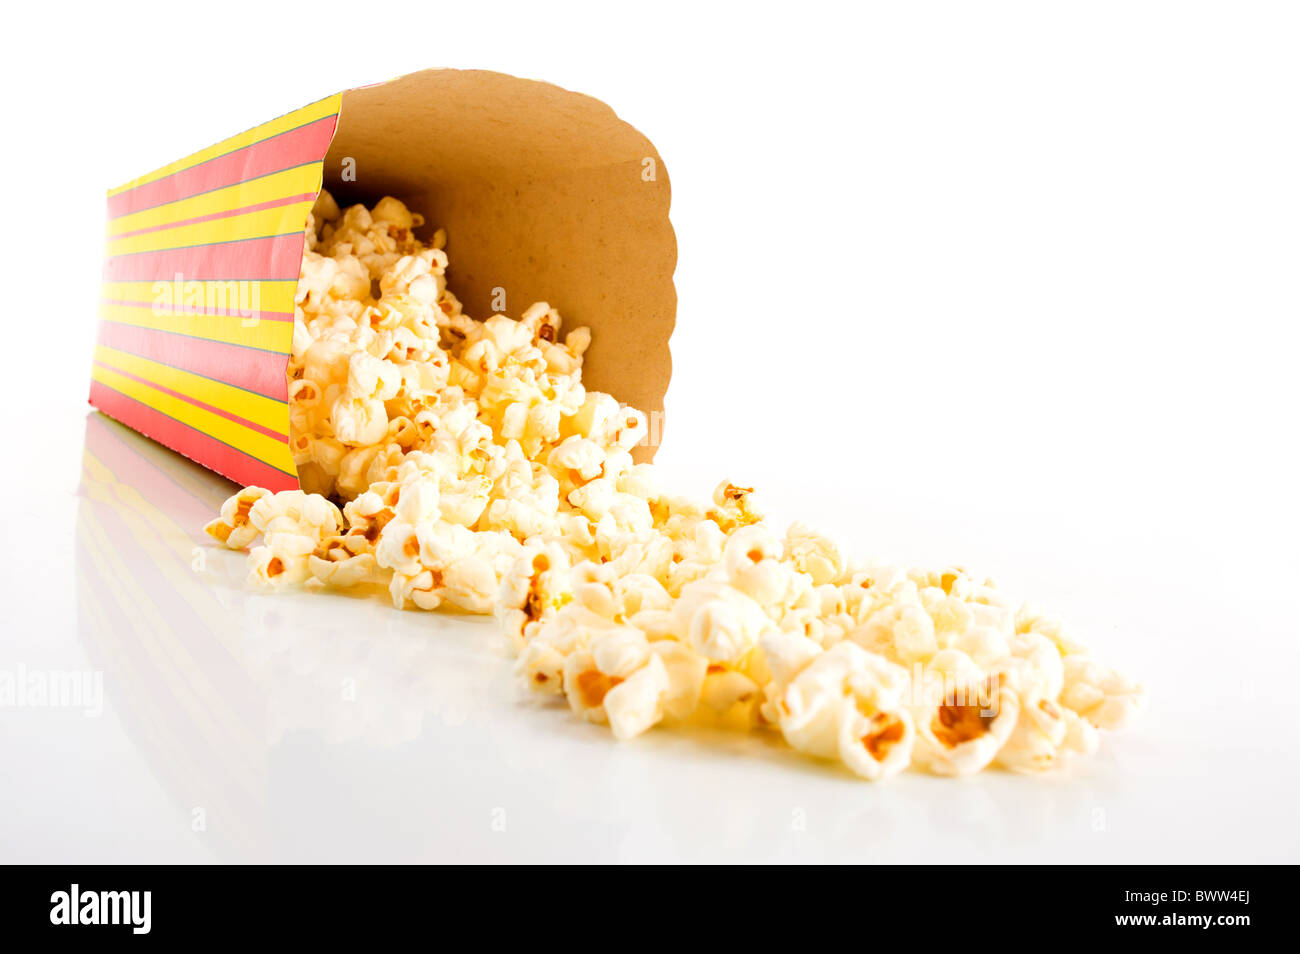 Snack box with popcorn dropped . Stock Photo